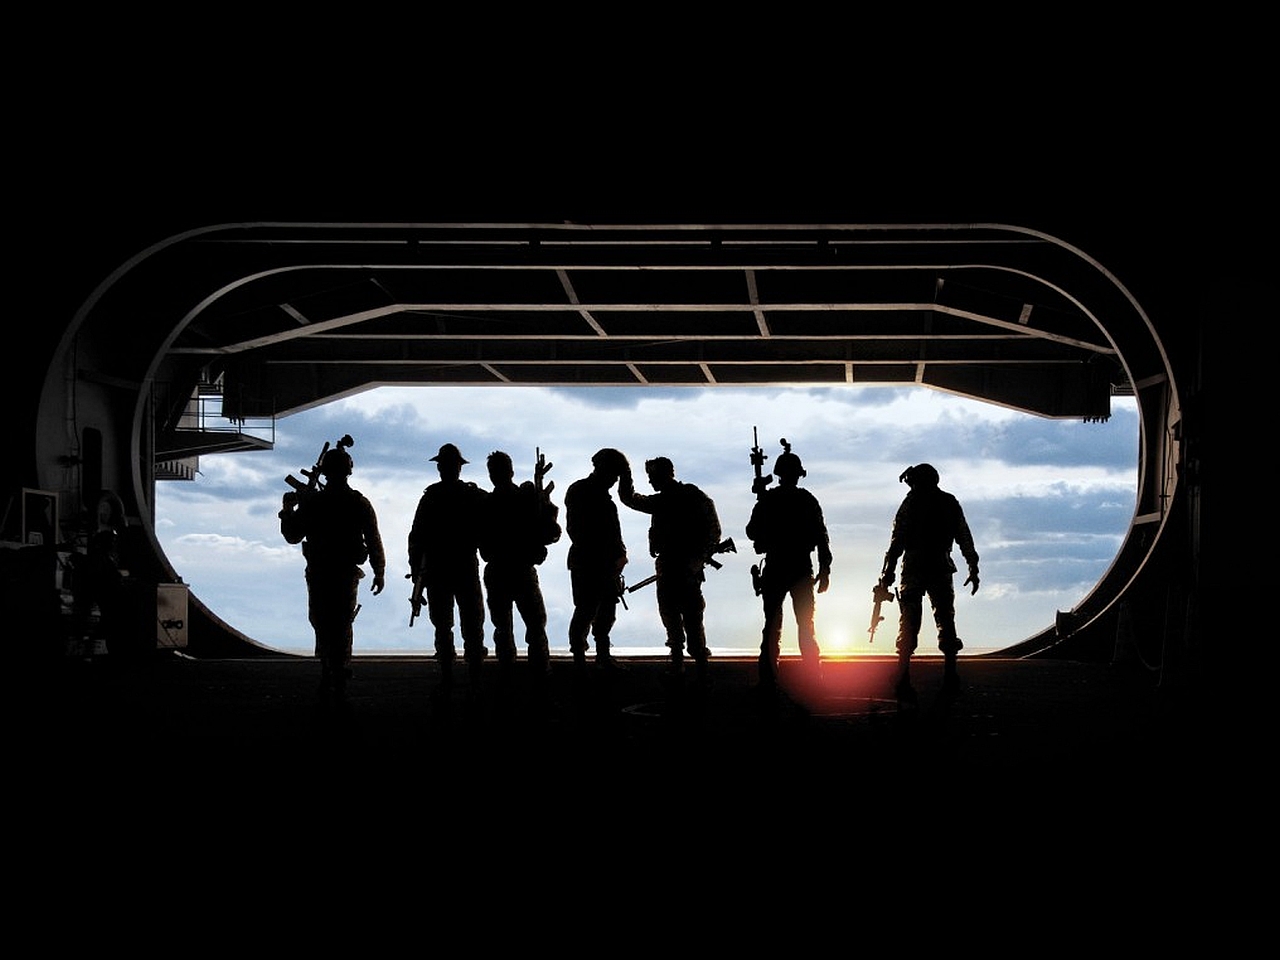 Act Of Valor Picture